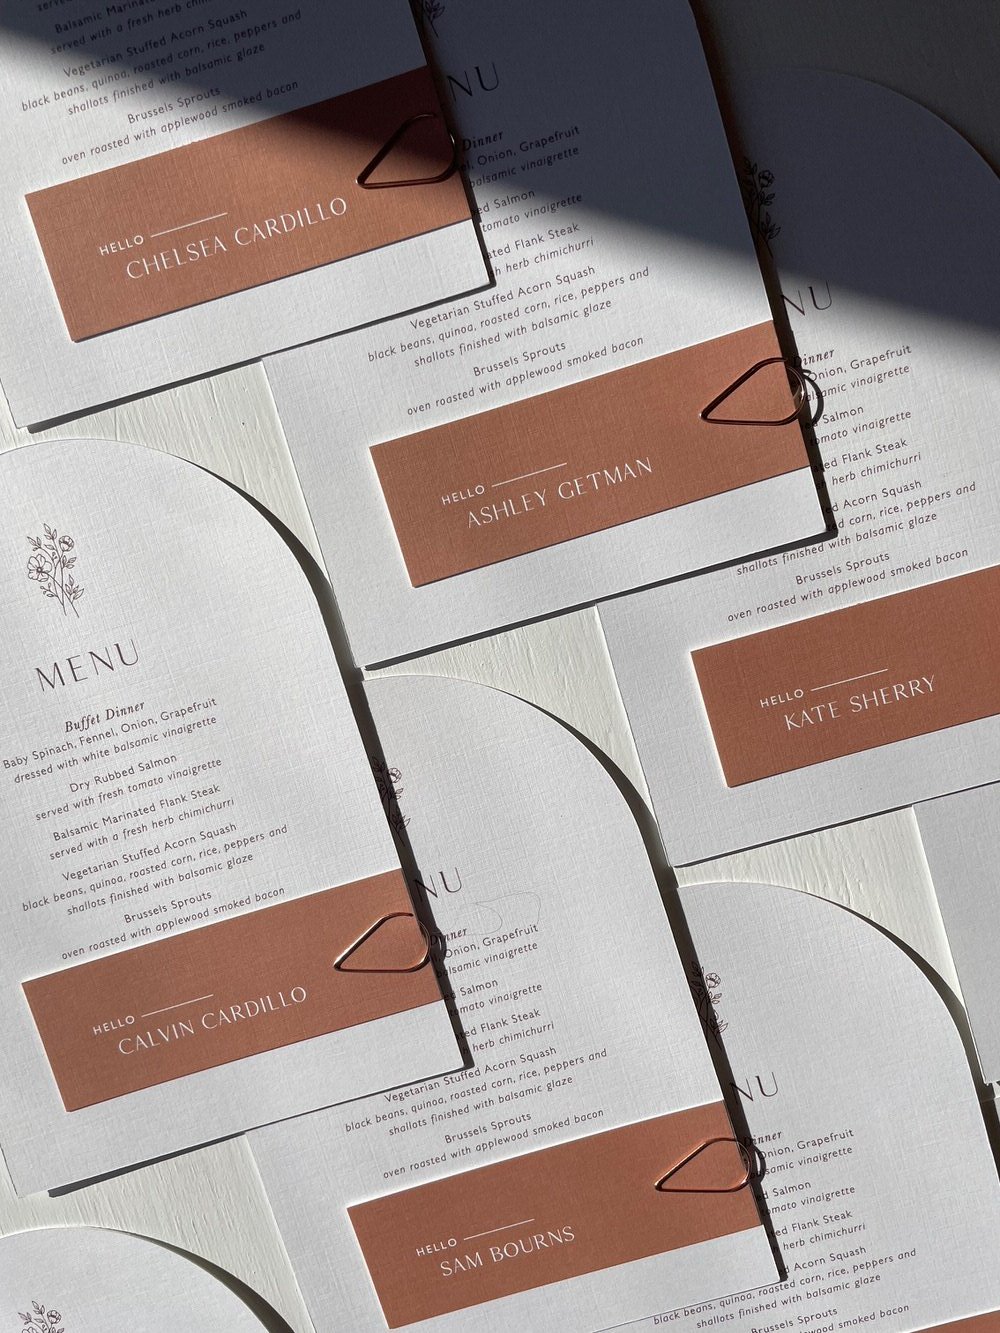 Just My Type Wedding Invitation Stationery NZ Wedding Menu Place Name Table Number0340.jpg